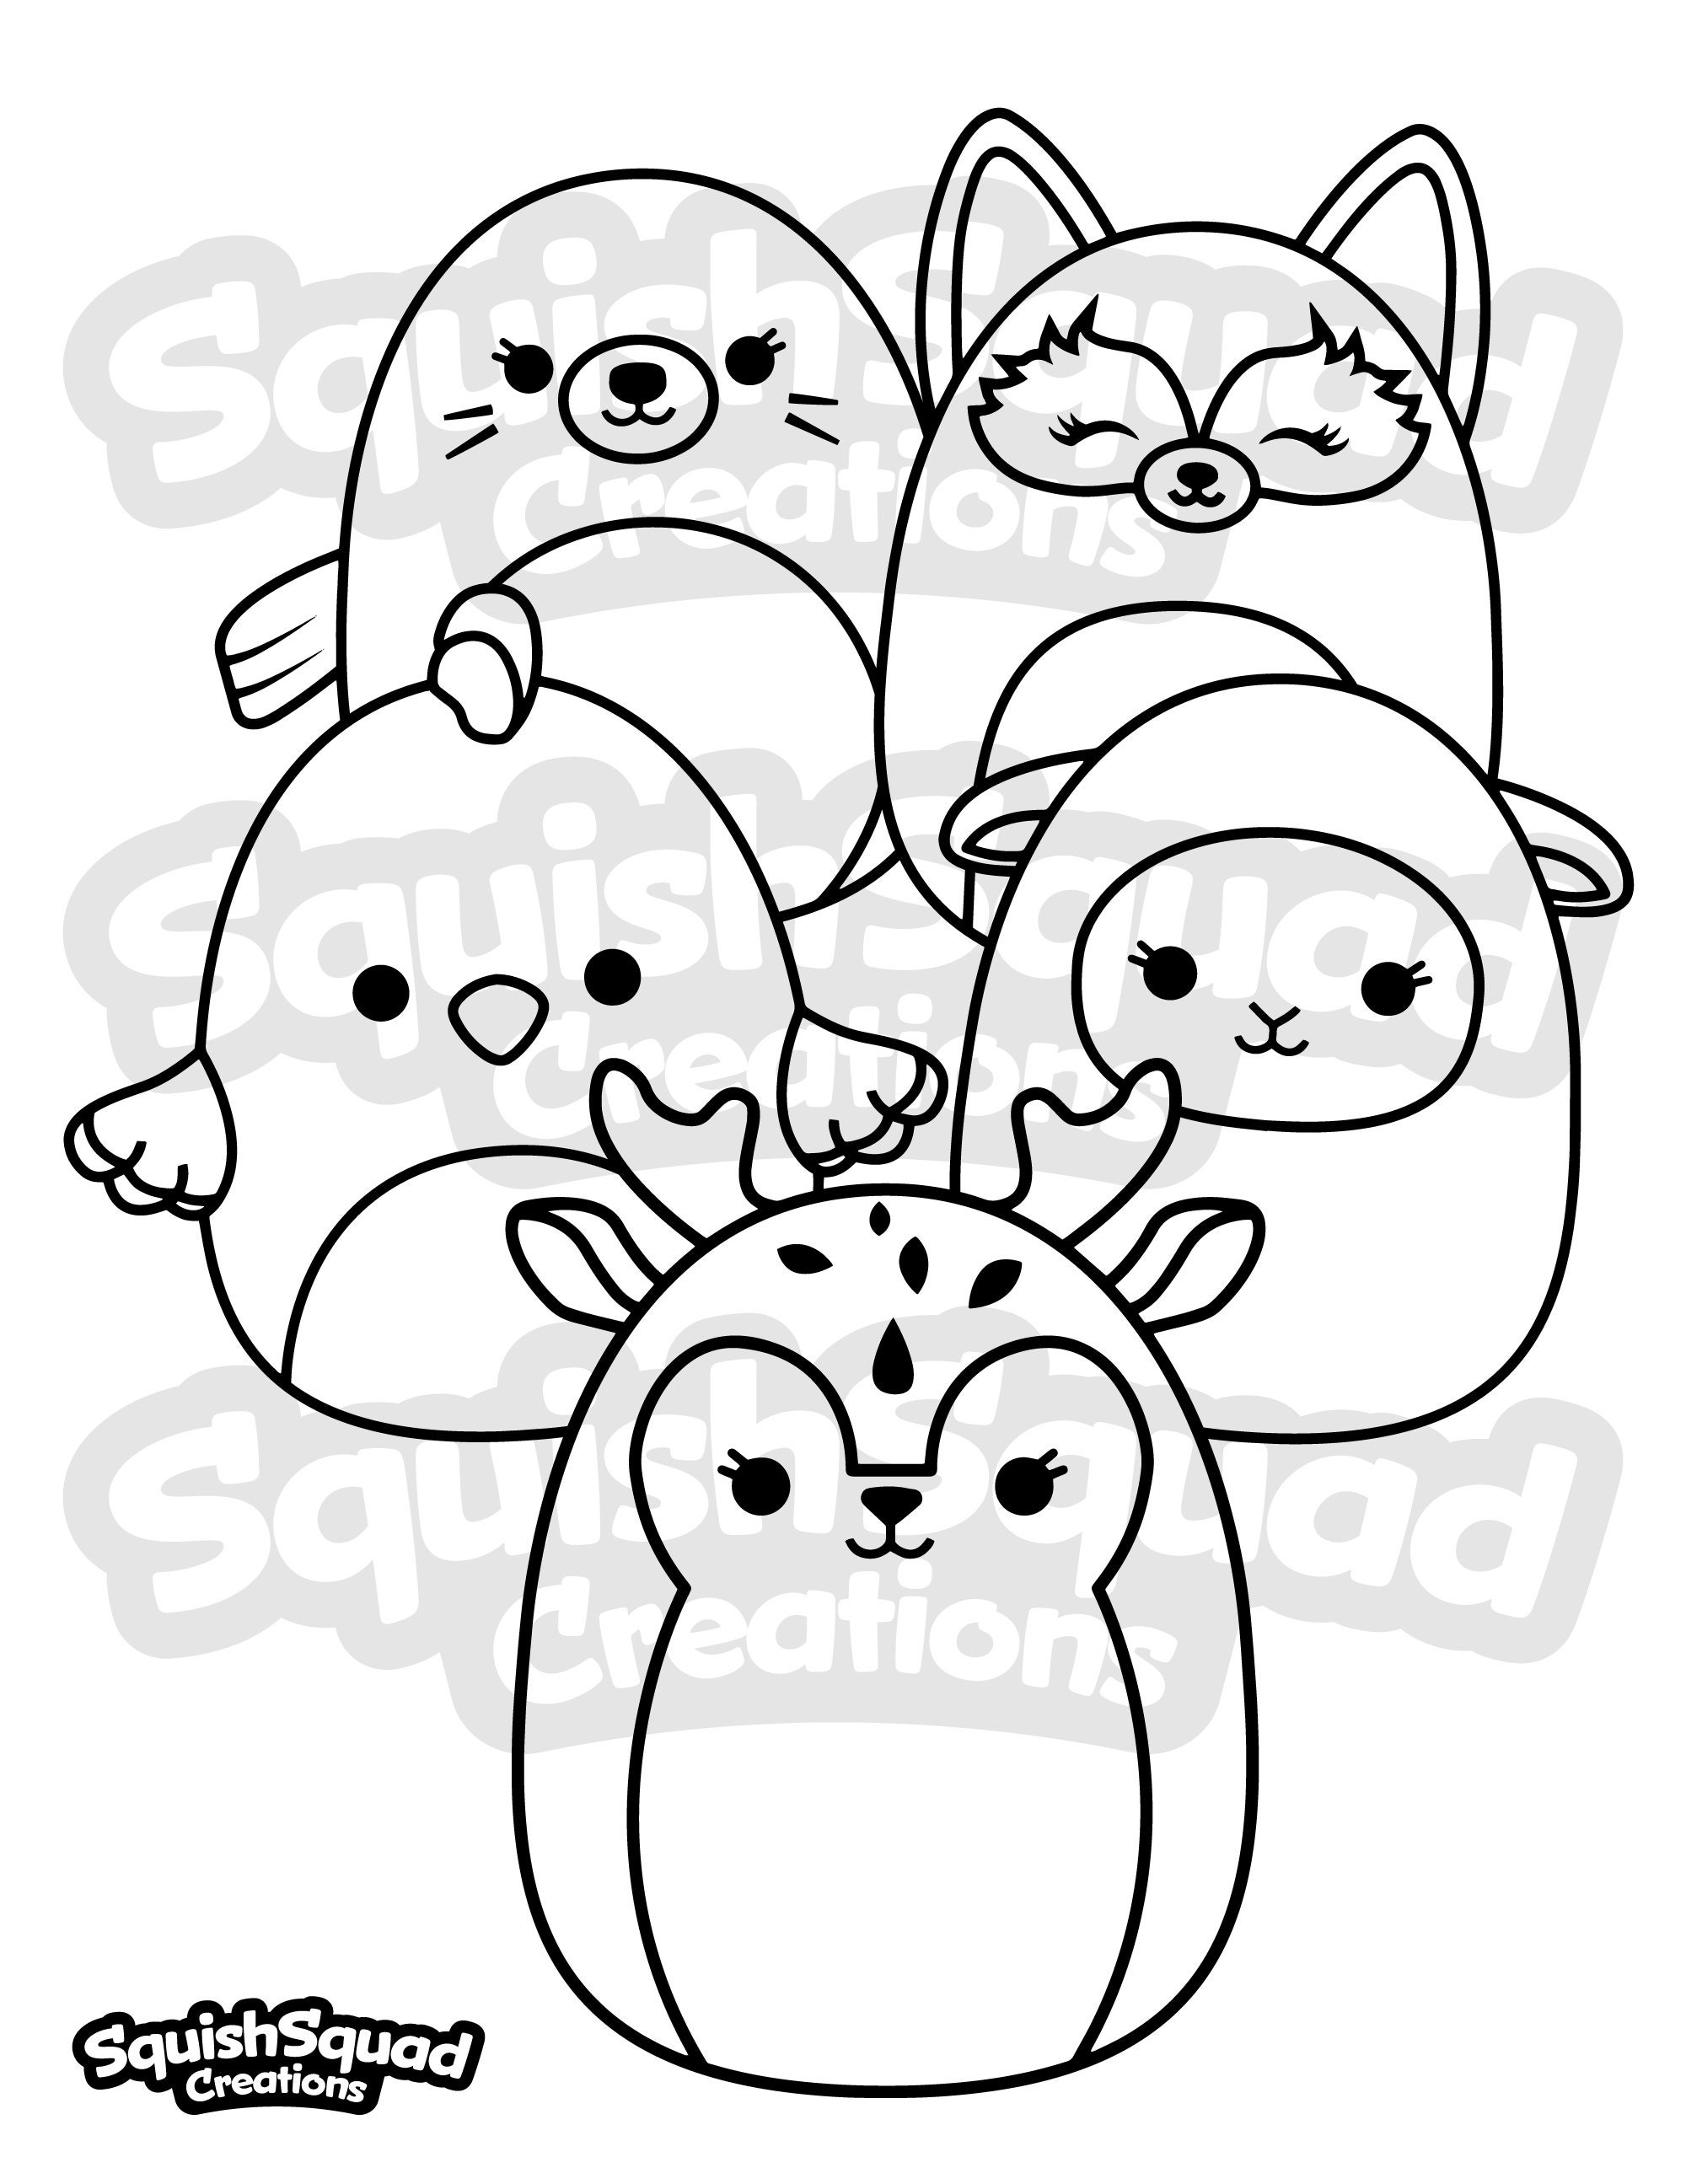 Squishmallow coloring page printable squishmallow coloring page squishmallow downloadable coloring sheet coloring page for kids